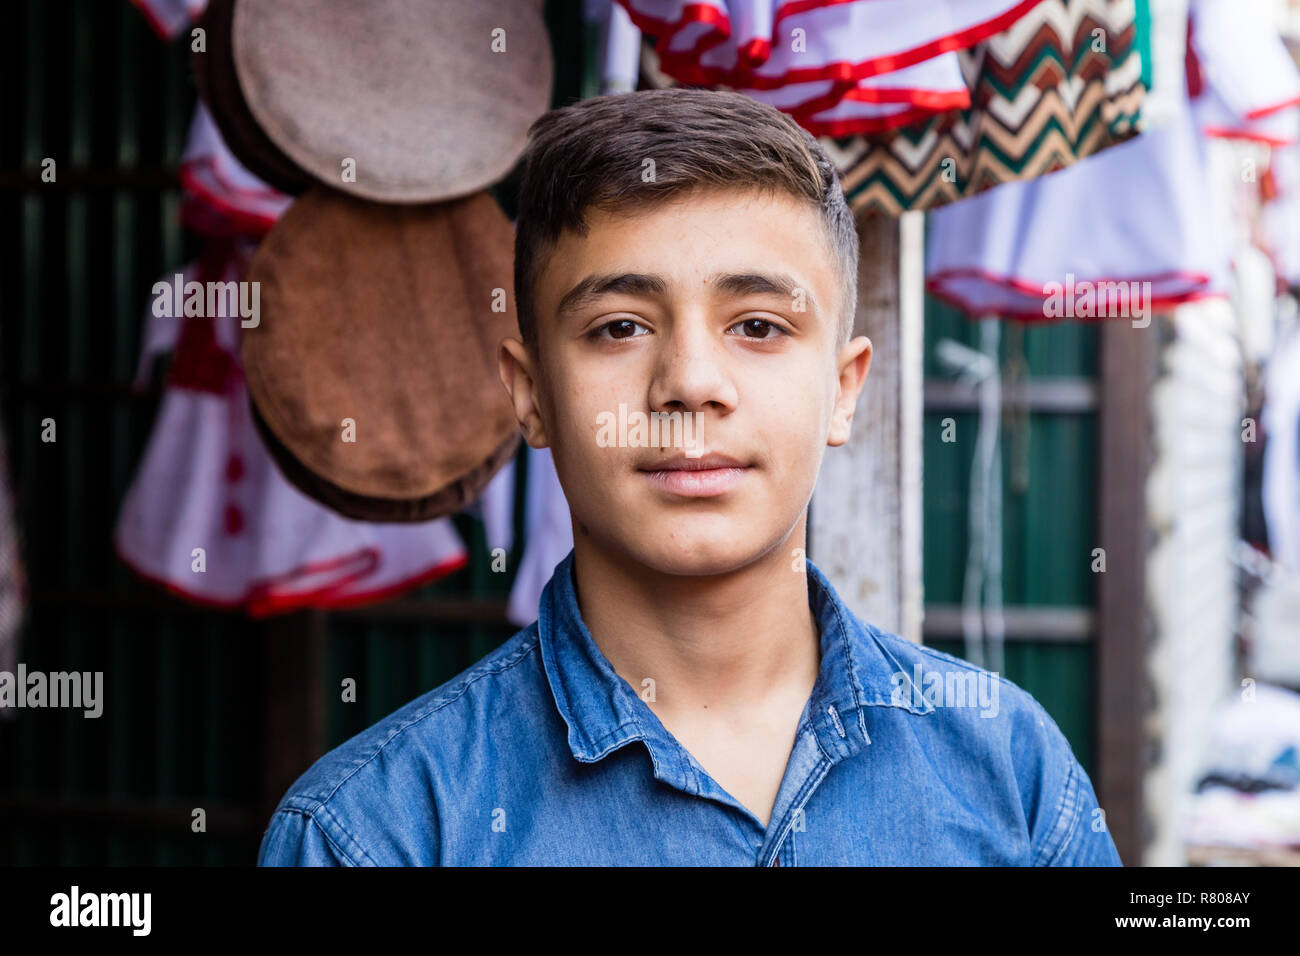 Khorog, Tajikistan August 25 2018: Handsome boy is standing in front of his stall, waiting for buyer of his wares, Khorog, Tajikistan Stock Photo